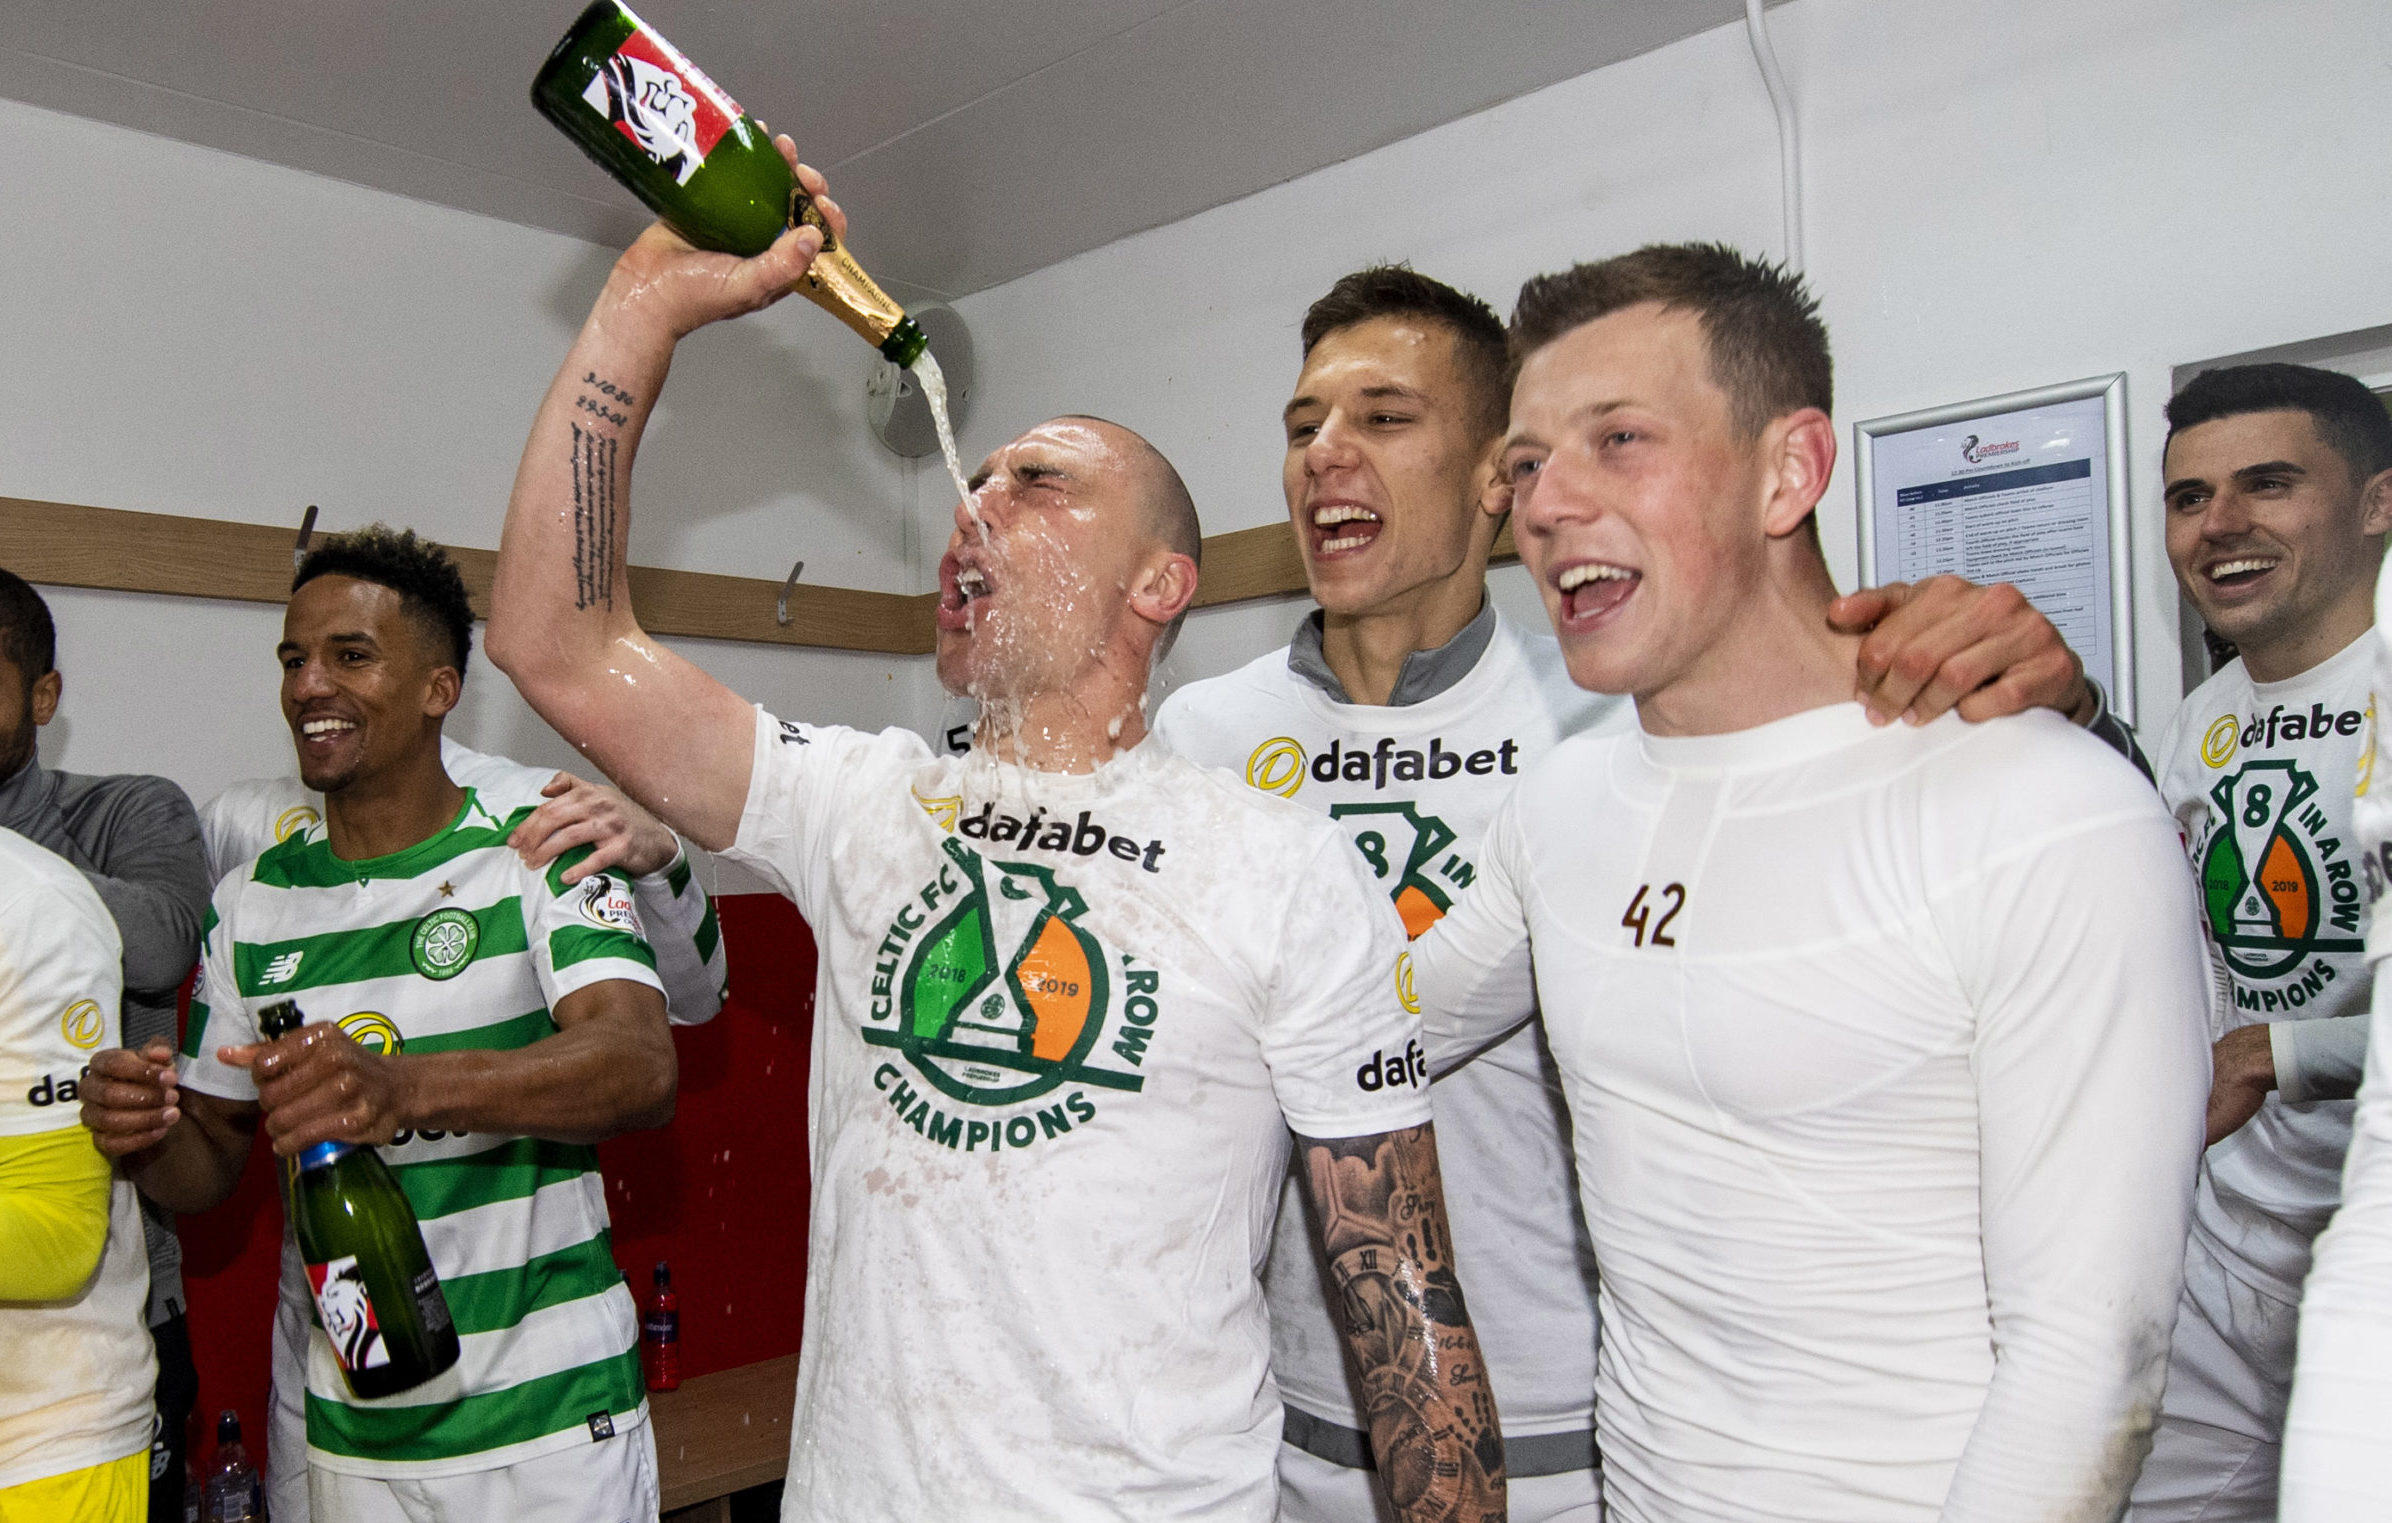 Celtic captain Scott Brown celebrates last season’s title win. But for some other players, expensive champagne is the social drink of choice